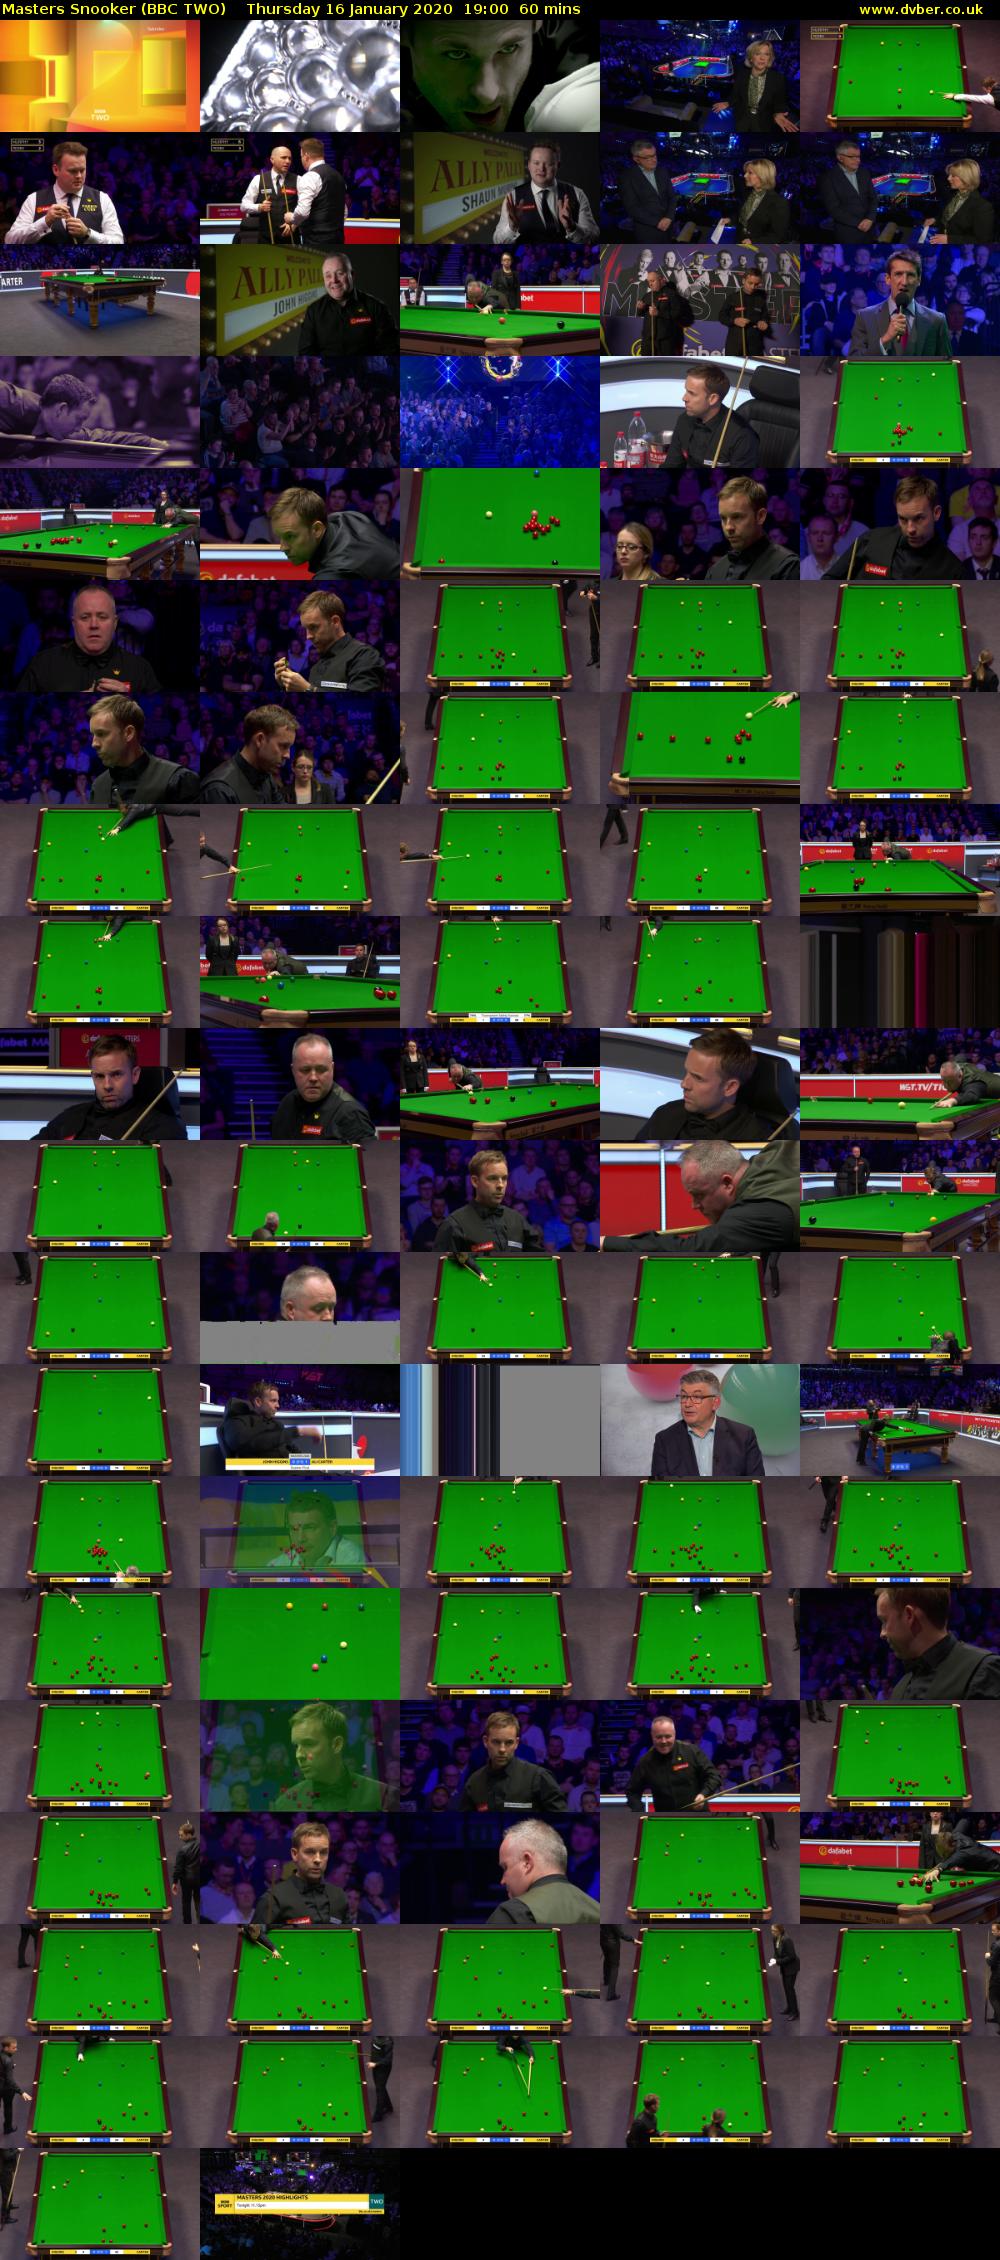 Masters Snooker (BBC TWO) Thursday 16 January 2020 19:00 - 20:00